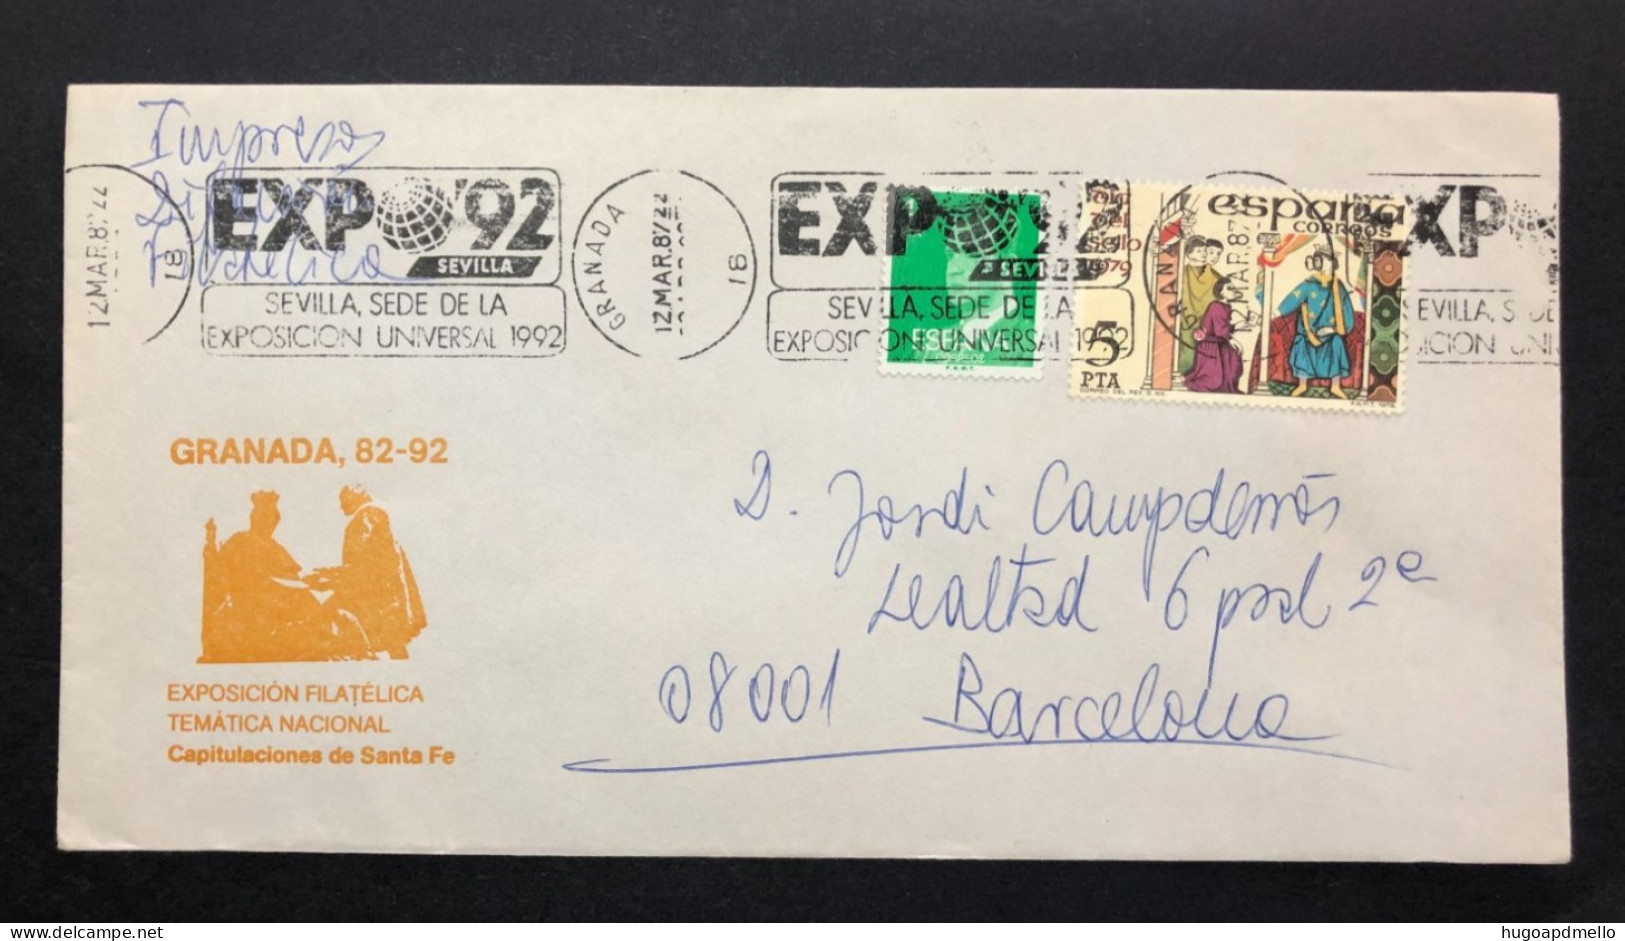 SPAIN, Cover With Special Cancellation « EXPO '92 », « GRANADA Postmark », 1987 - 1992 – Séville (Espagne)